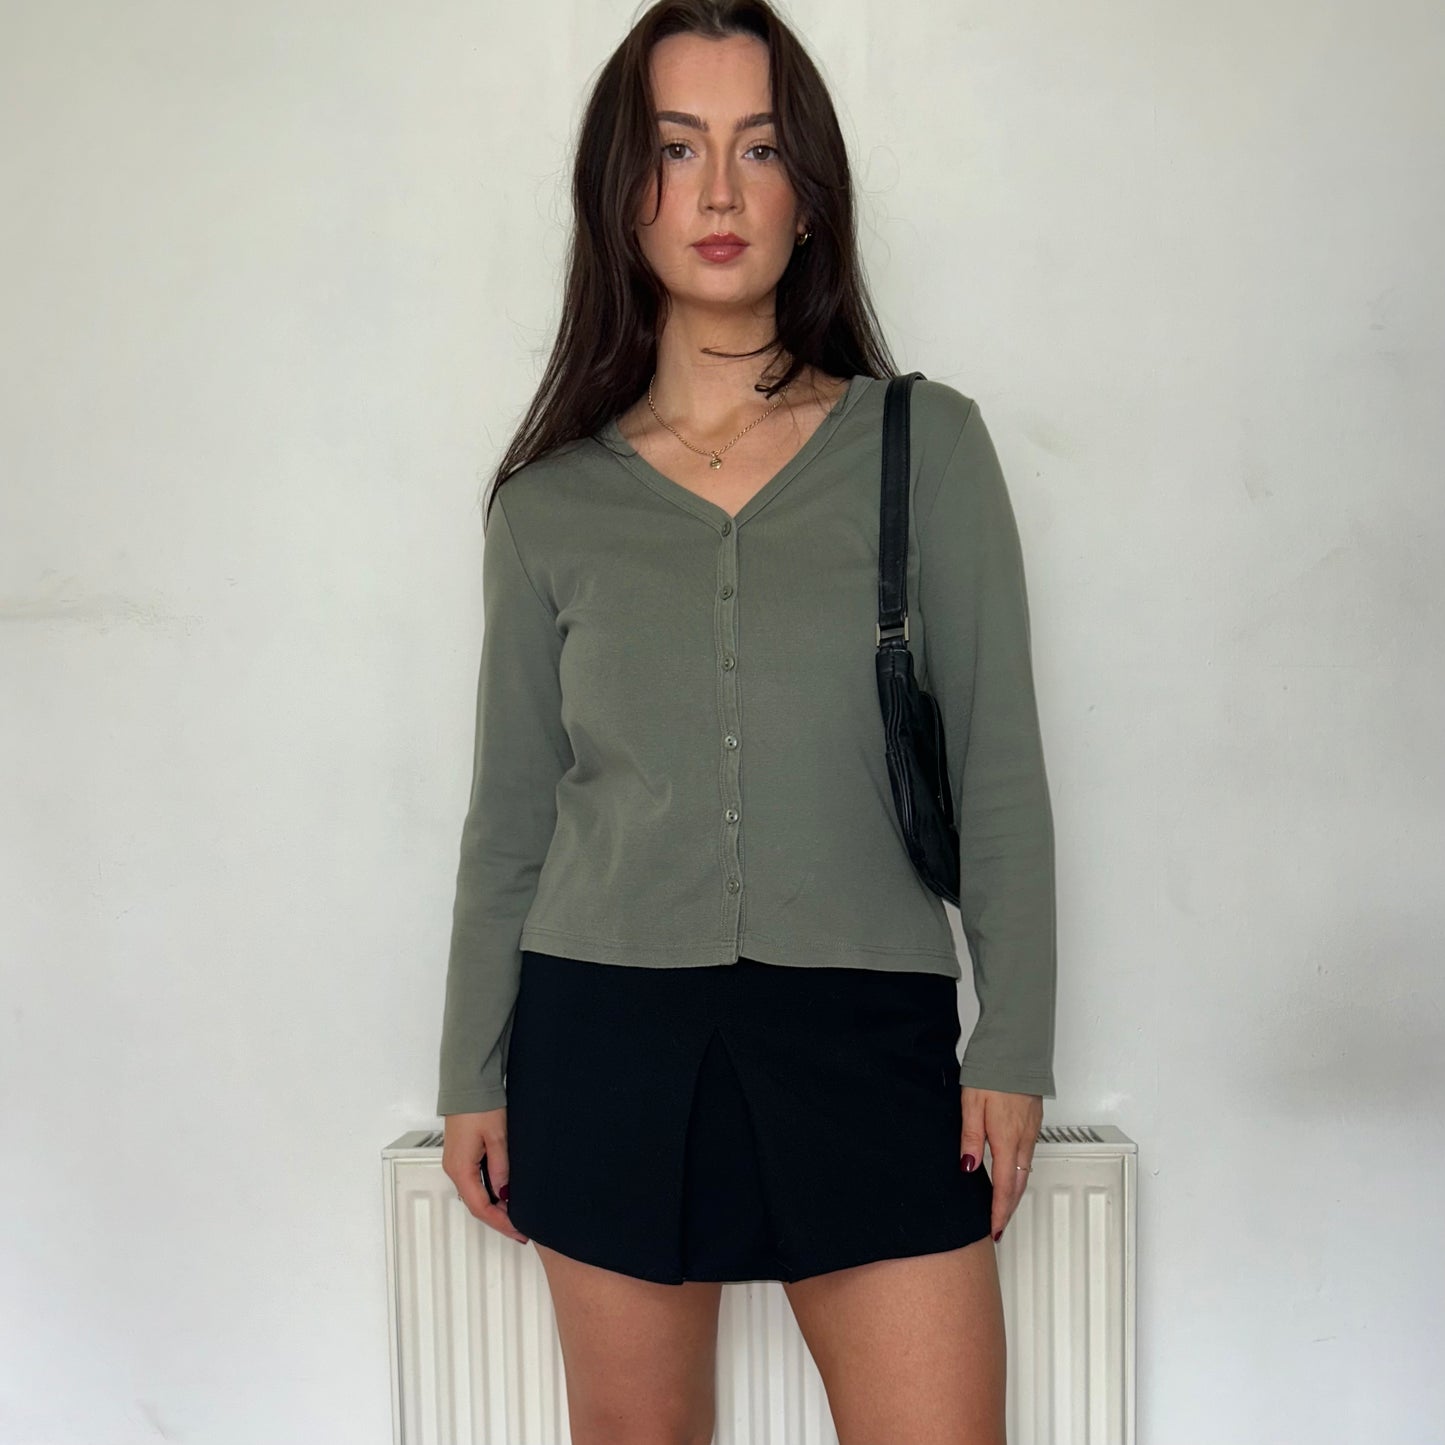 green button up long sleeve top shown on a model wearing a black skirt and a black bag